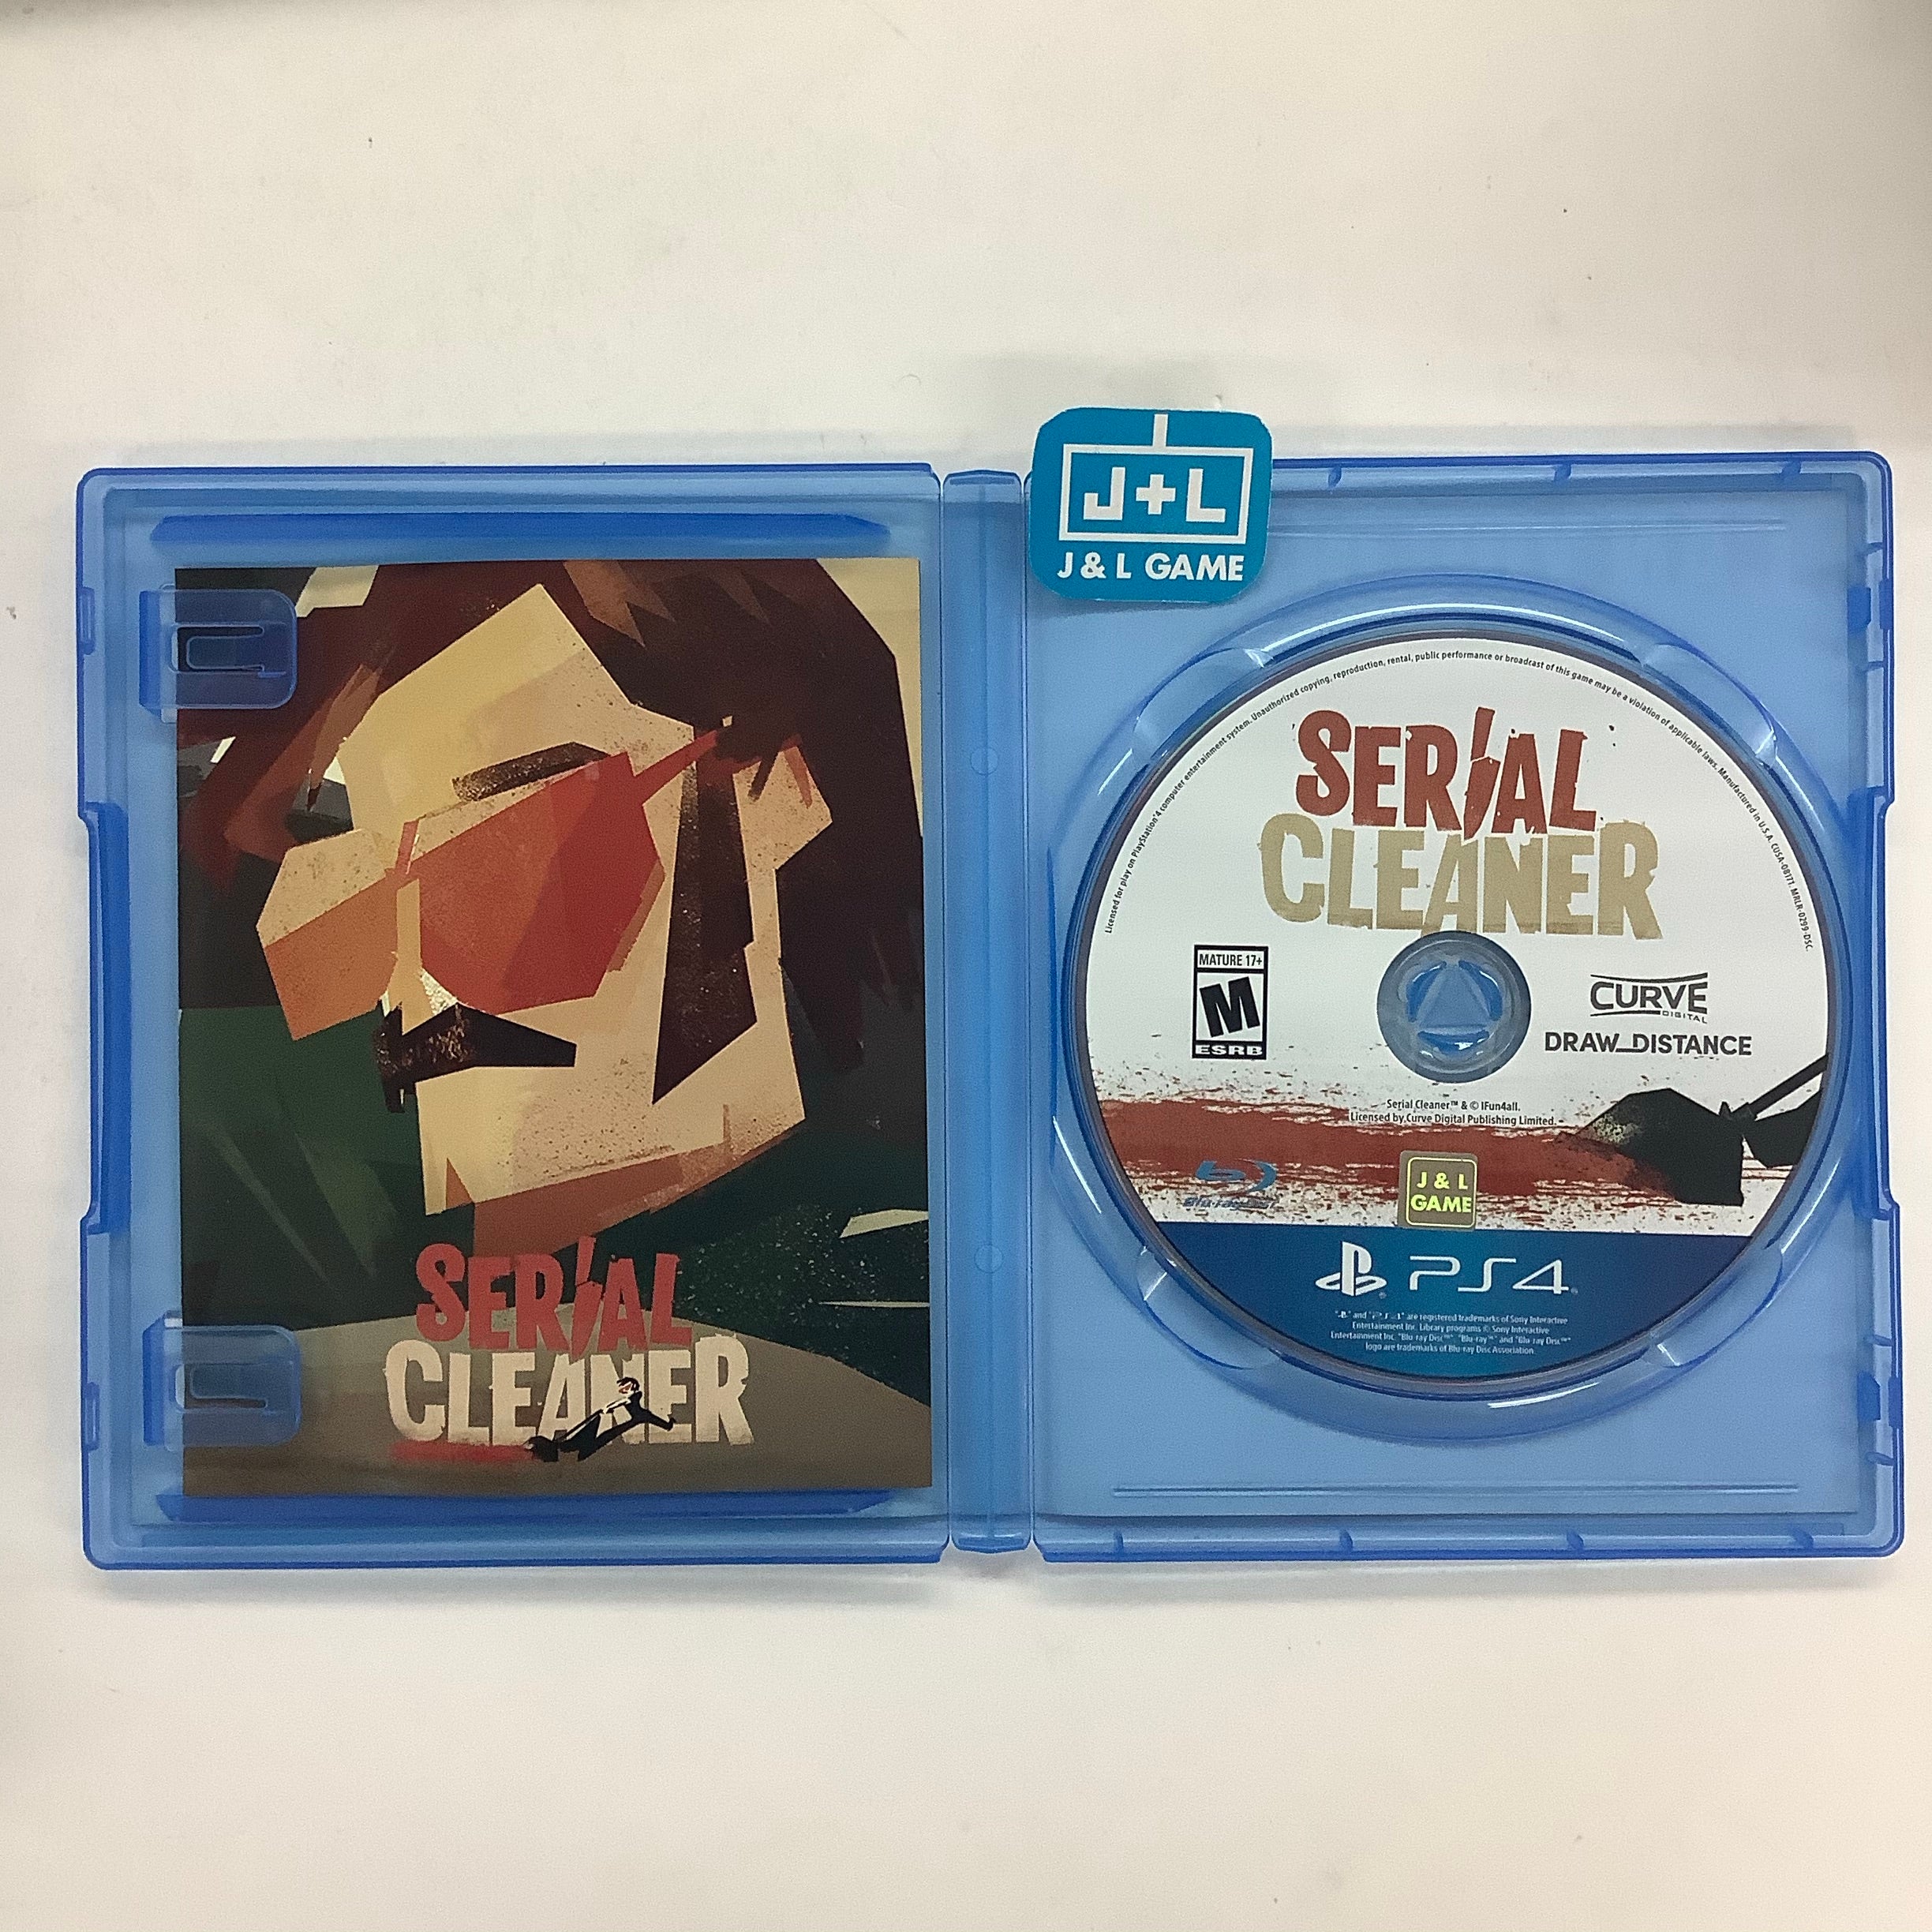 Serial Cleaner (Limited Run Games #299) - (PS4) PlayStation 4 [Pre-Owned] Video Games Limited Run Games   